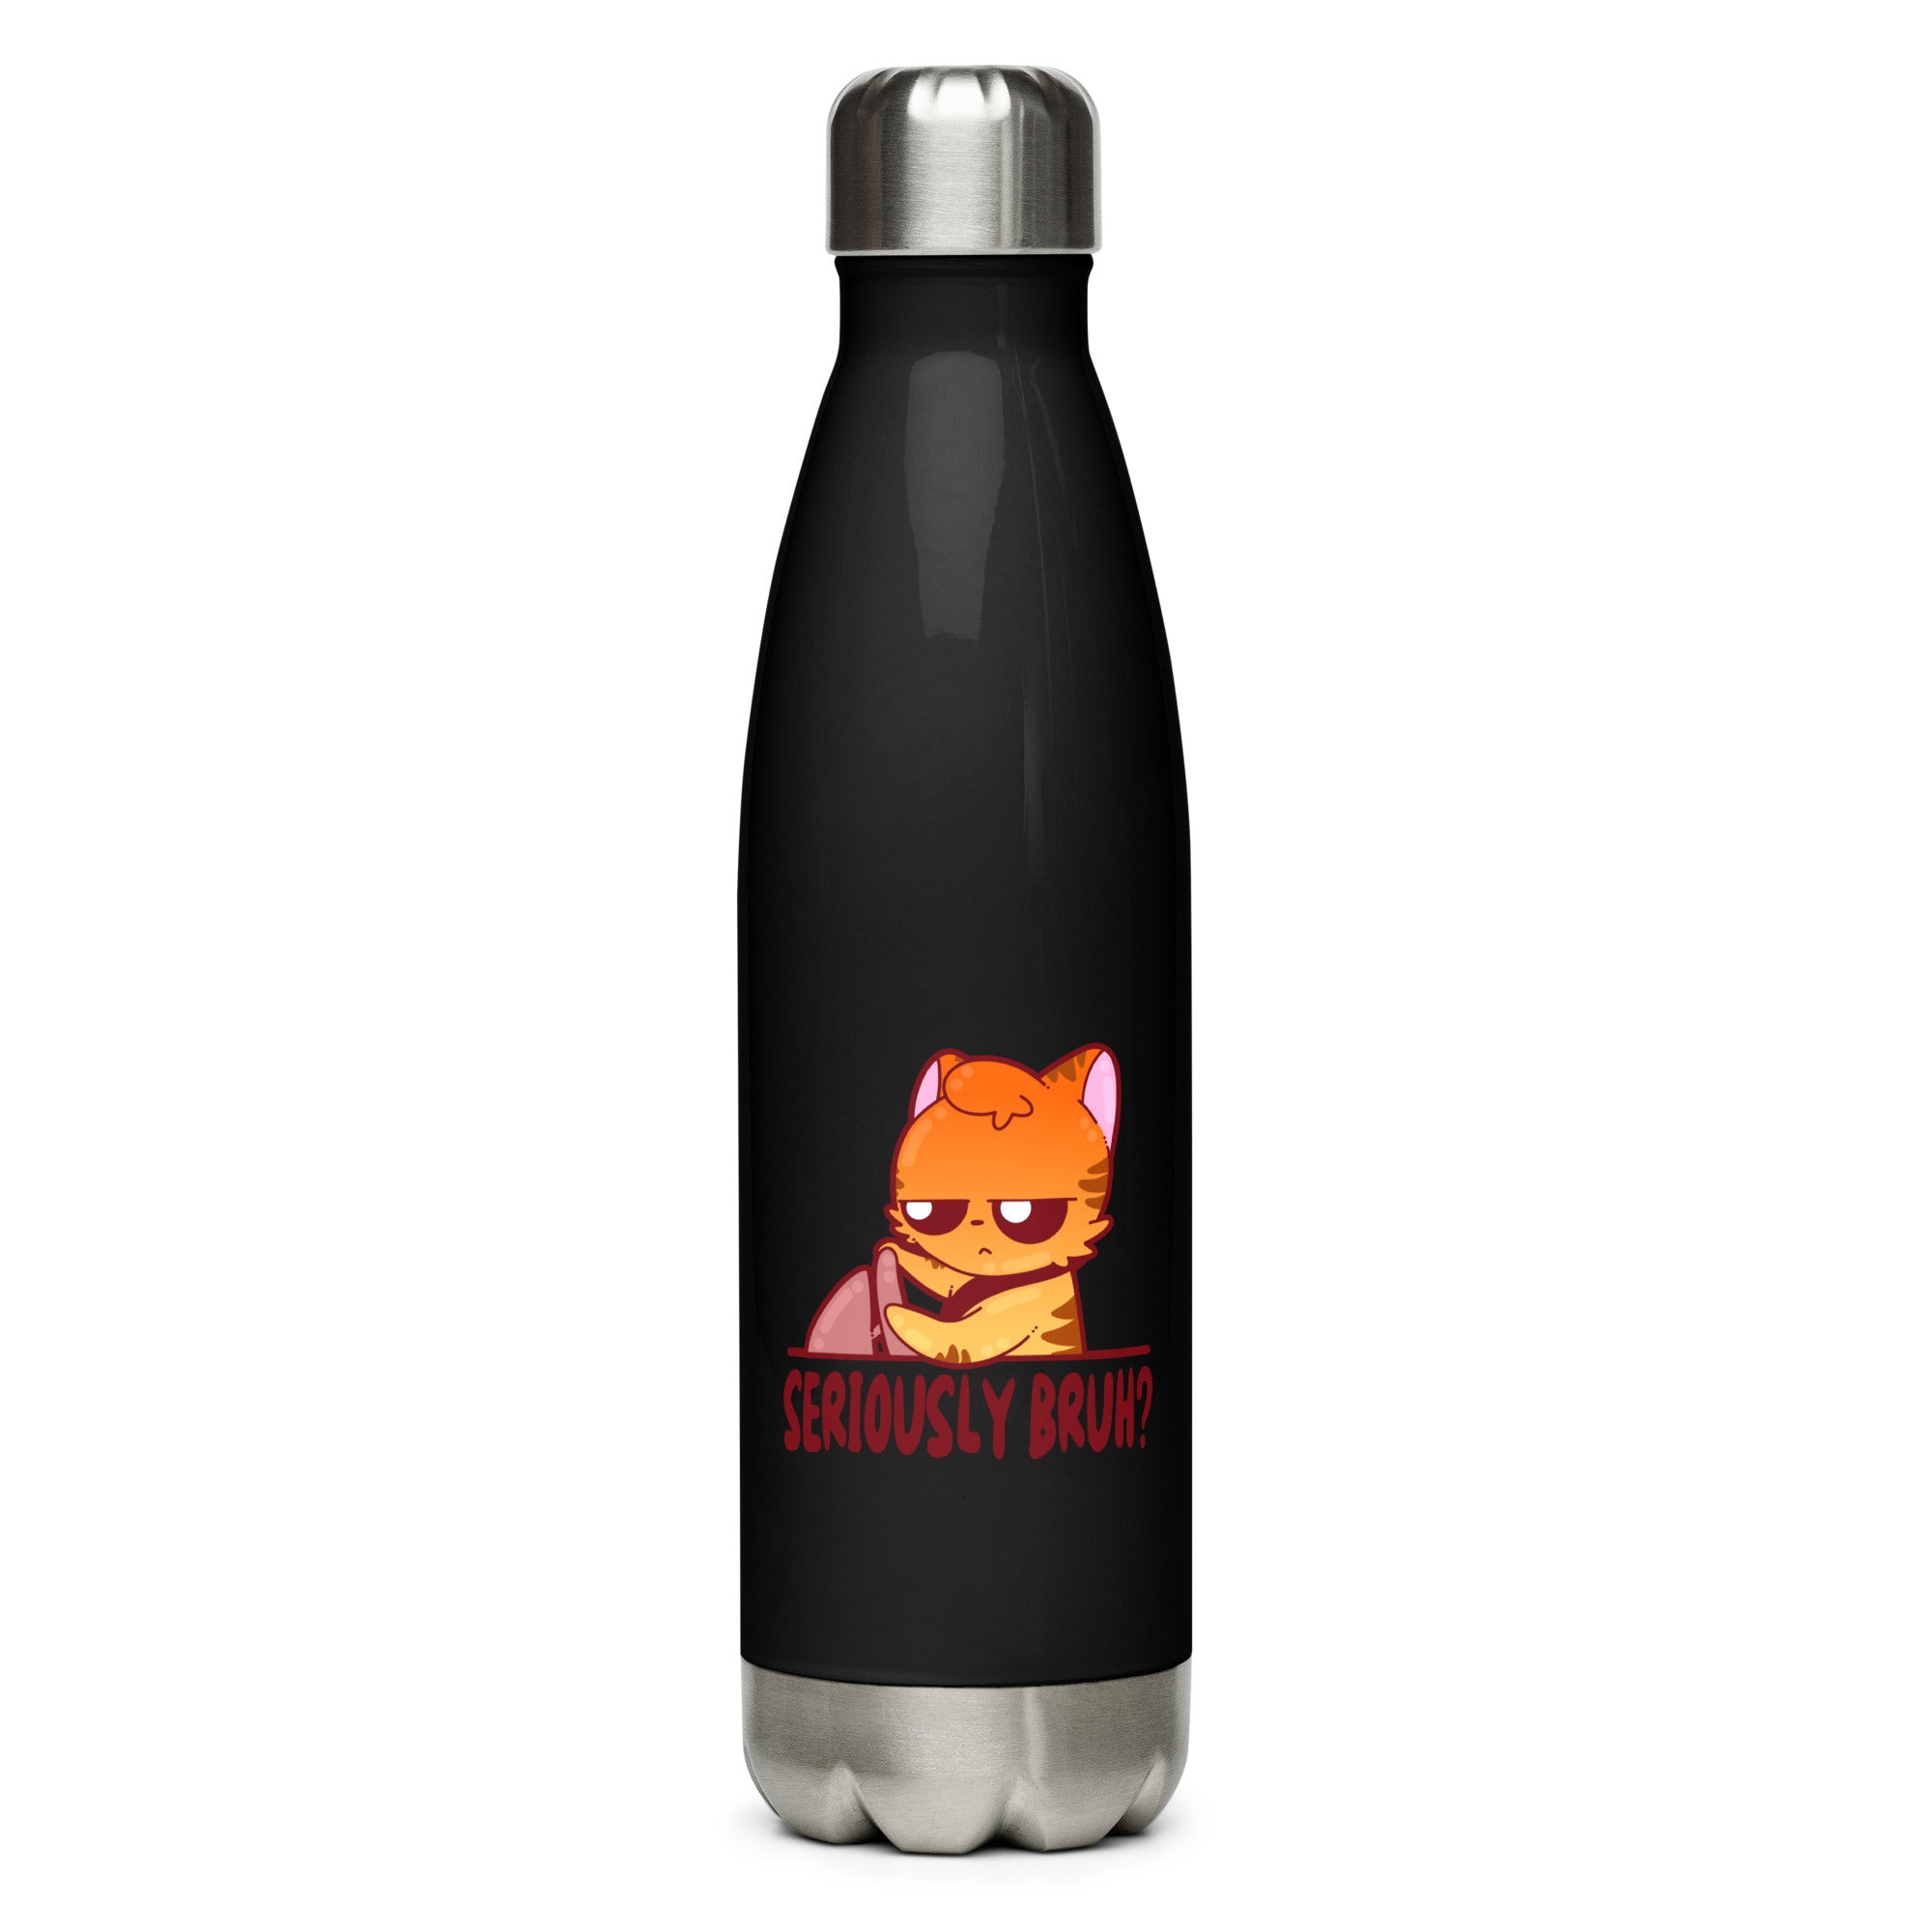 SERIOUSLY BRUH  - Stainless Steel Water Bottle - ChubbleGumLLC